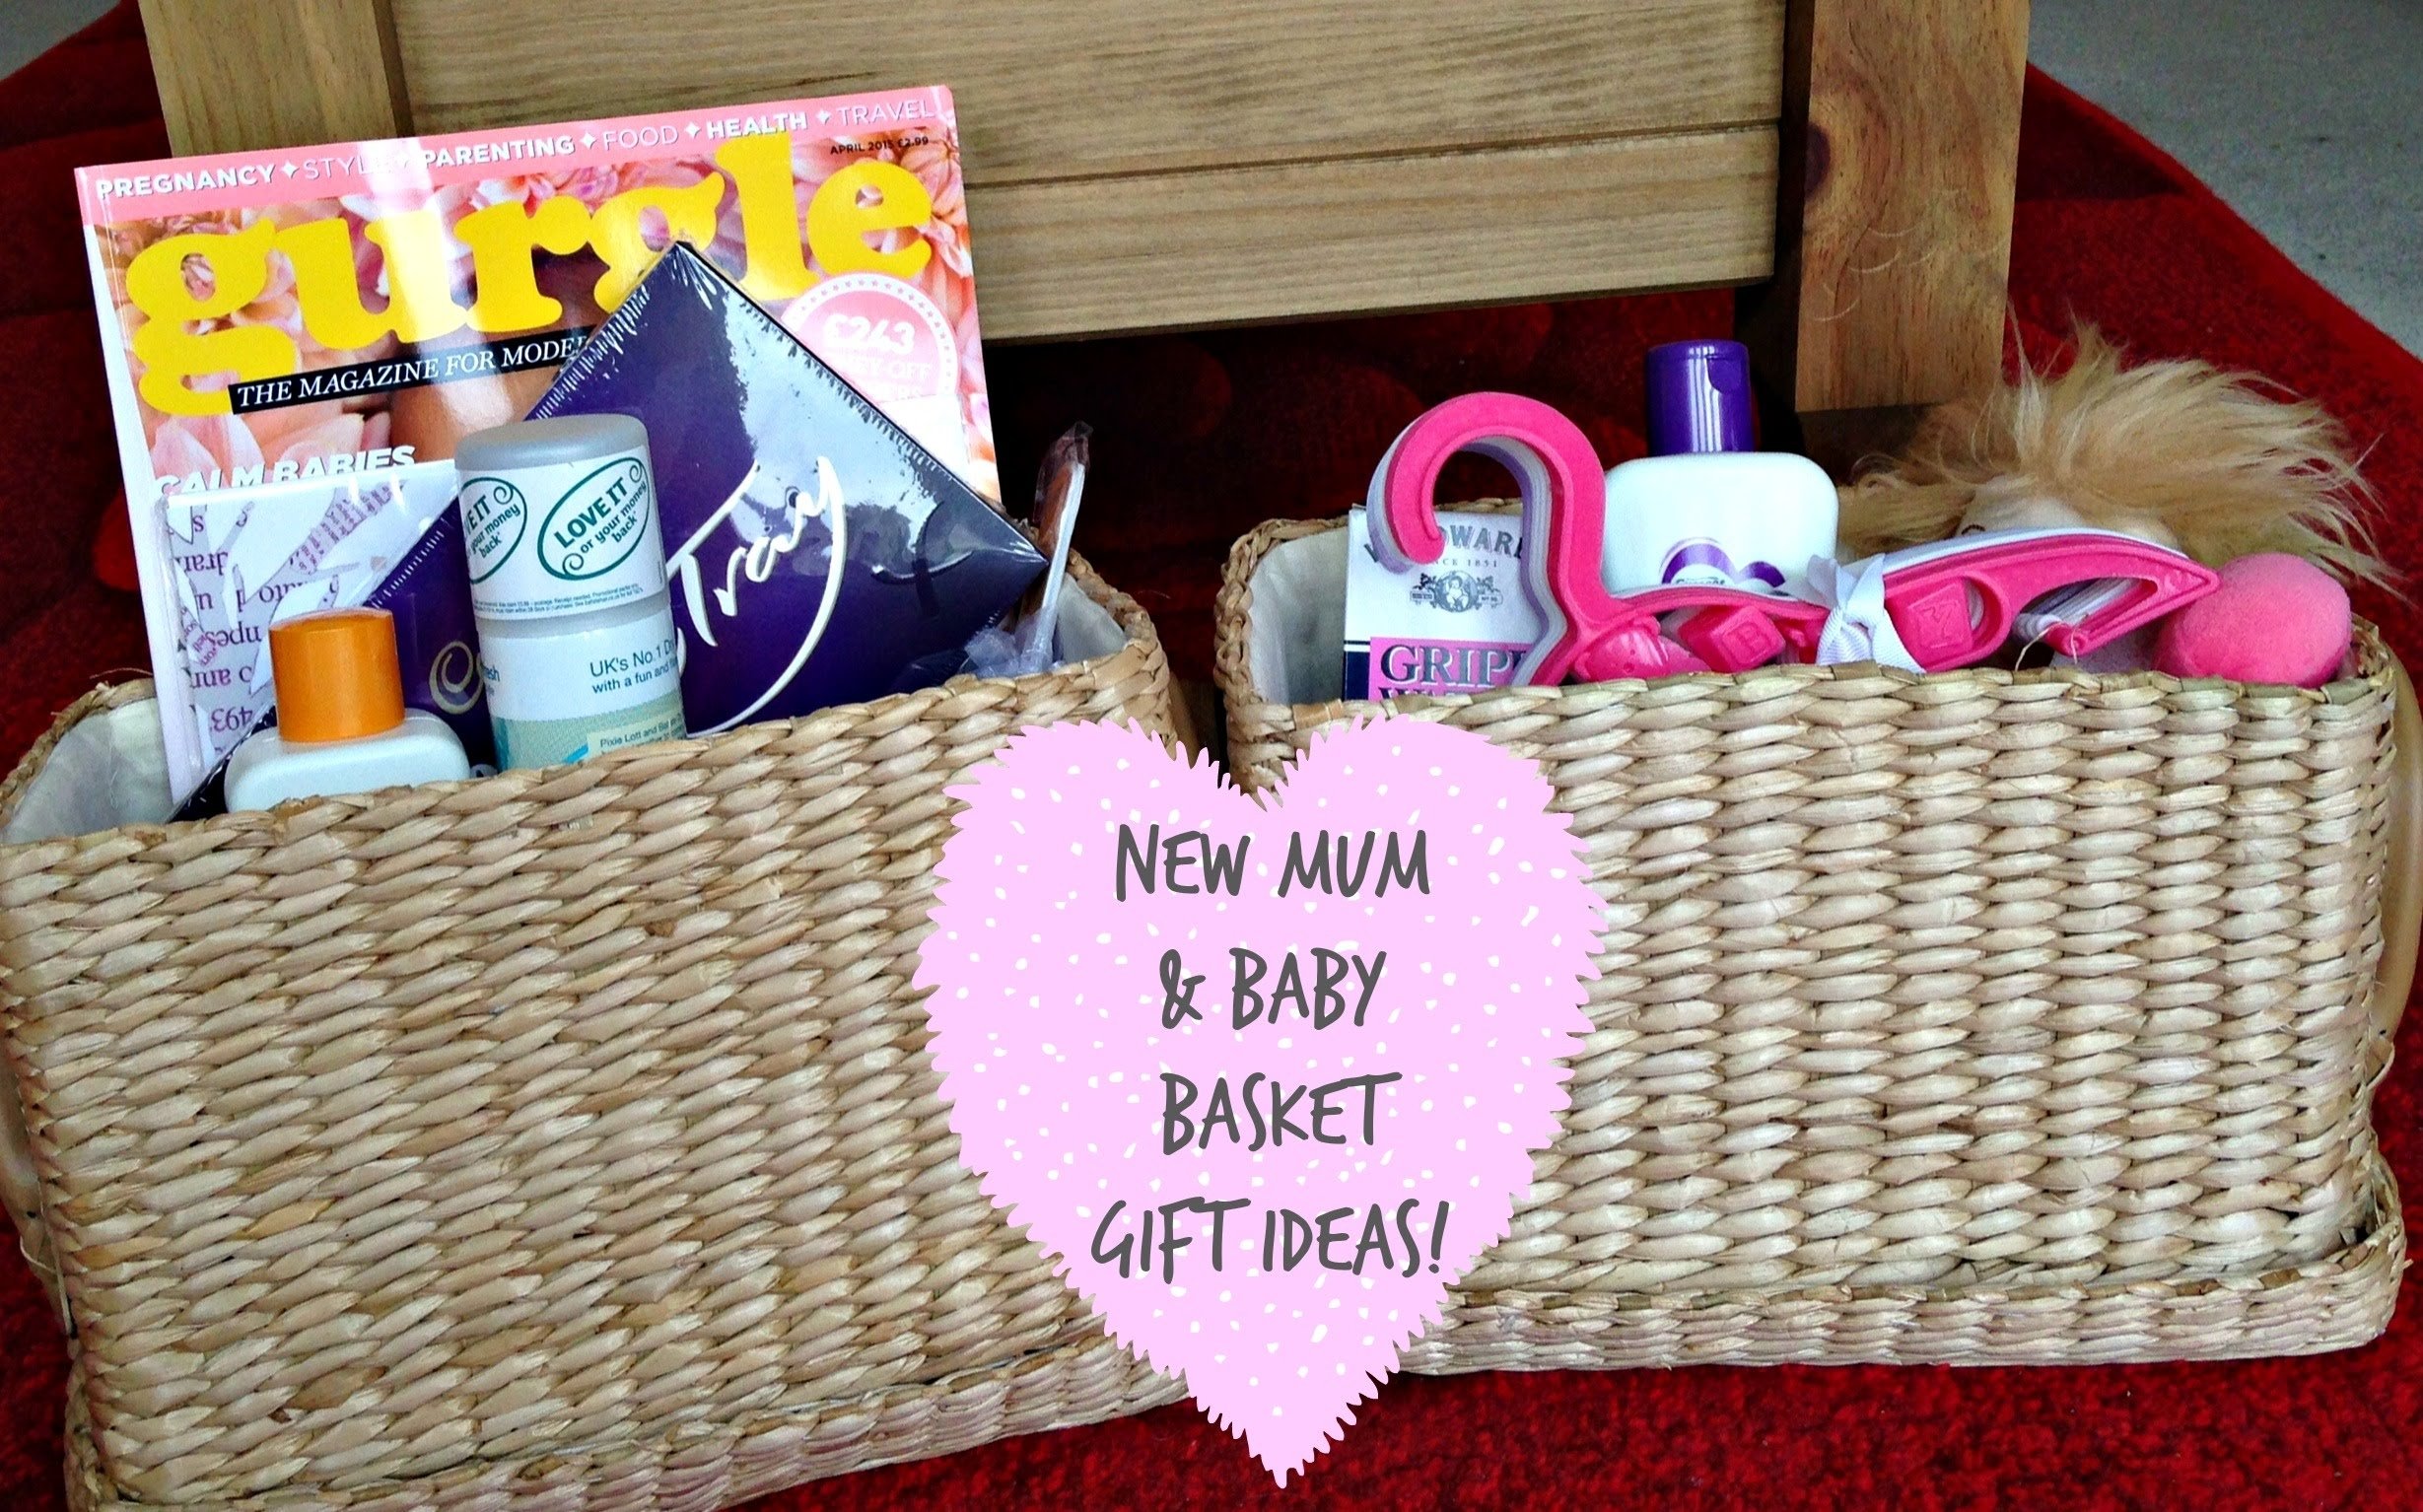 10 Lovable Gift Ideas For New Mom new mum baby basket gift ideas kerry dyer youtube 3 2022